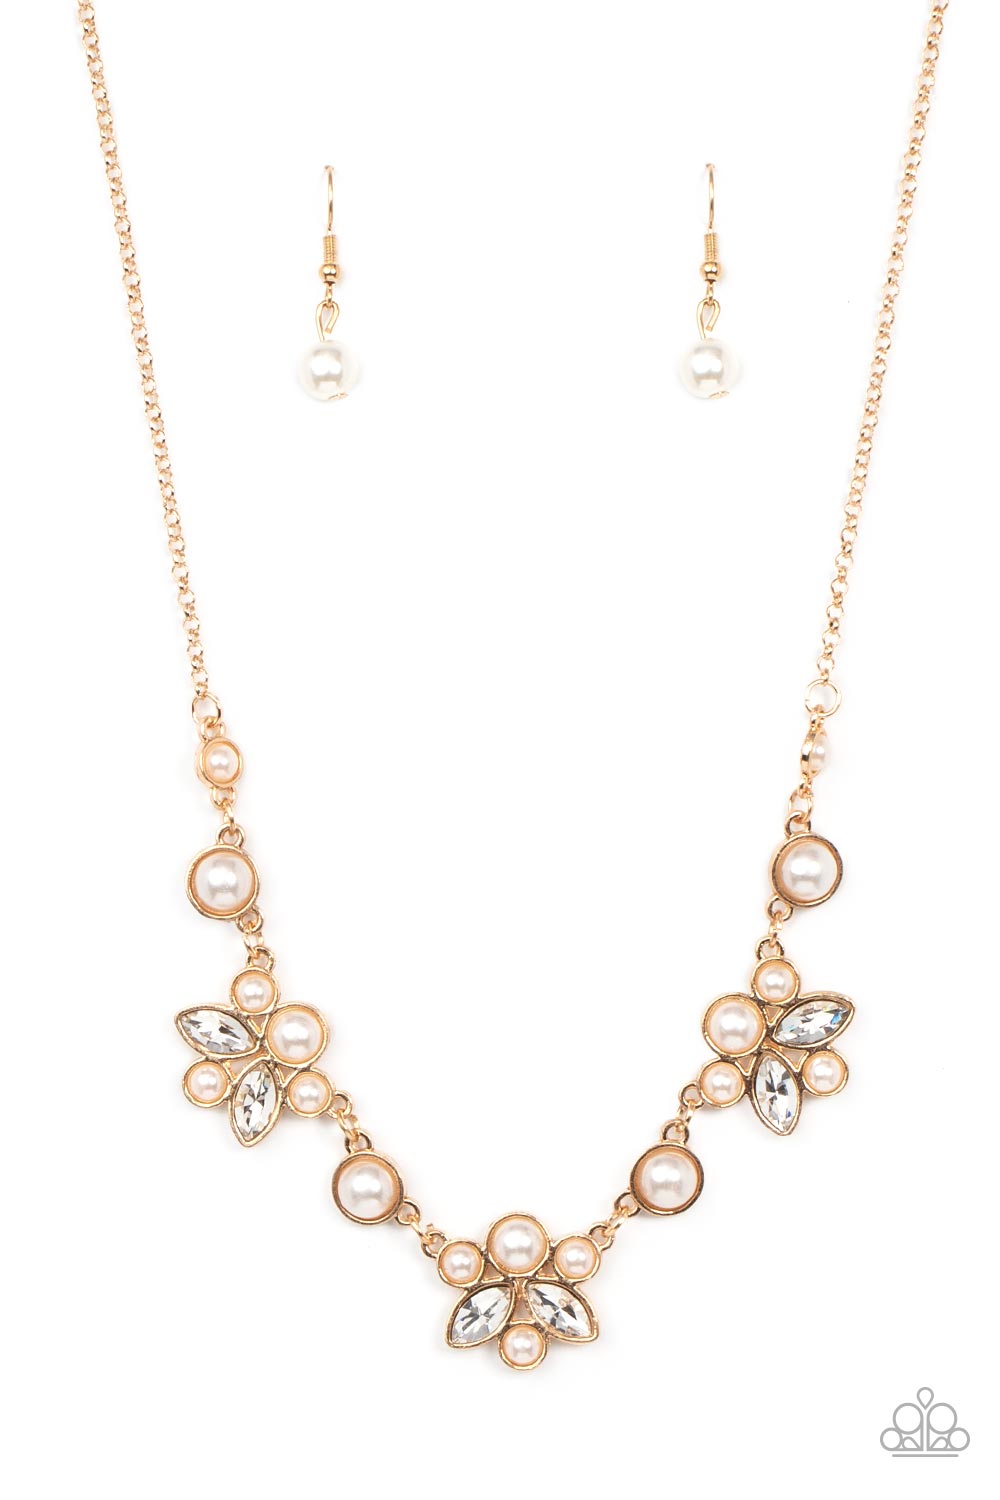 Royally Ever After Gold Necklace - Paparazzi Accessories  Infused with solitaire pearls, dainty clusters of bubbly white pearls and glassy white marquise style rhinestones delicately gather into clustered frames below the collar for an elegantly timeless finish. Features an adjustable clasp closure.  Sold as one individual necklace. Includes one pair of matching earrings.